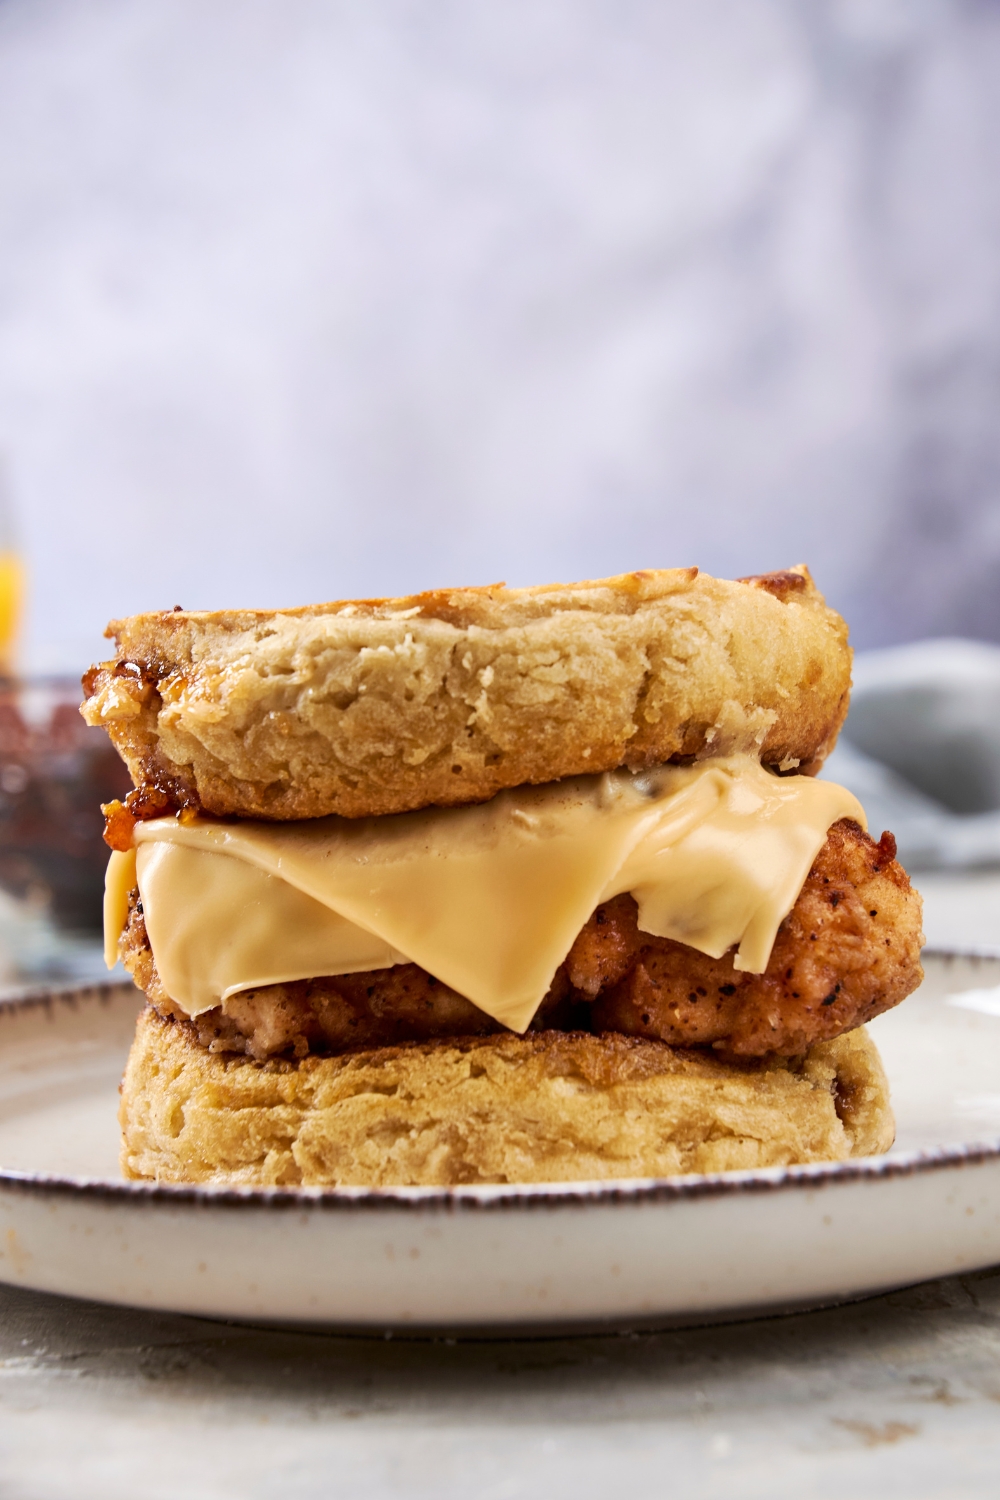 A crispy fried piece of chicken is topped with sliced cheese and sandwiched between two fluffy hotcakes.